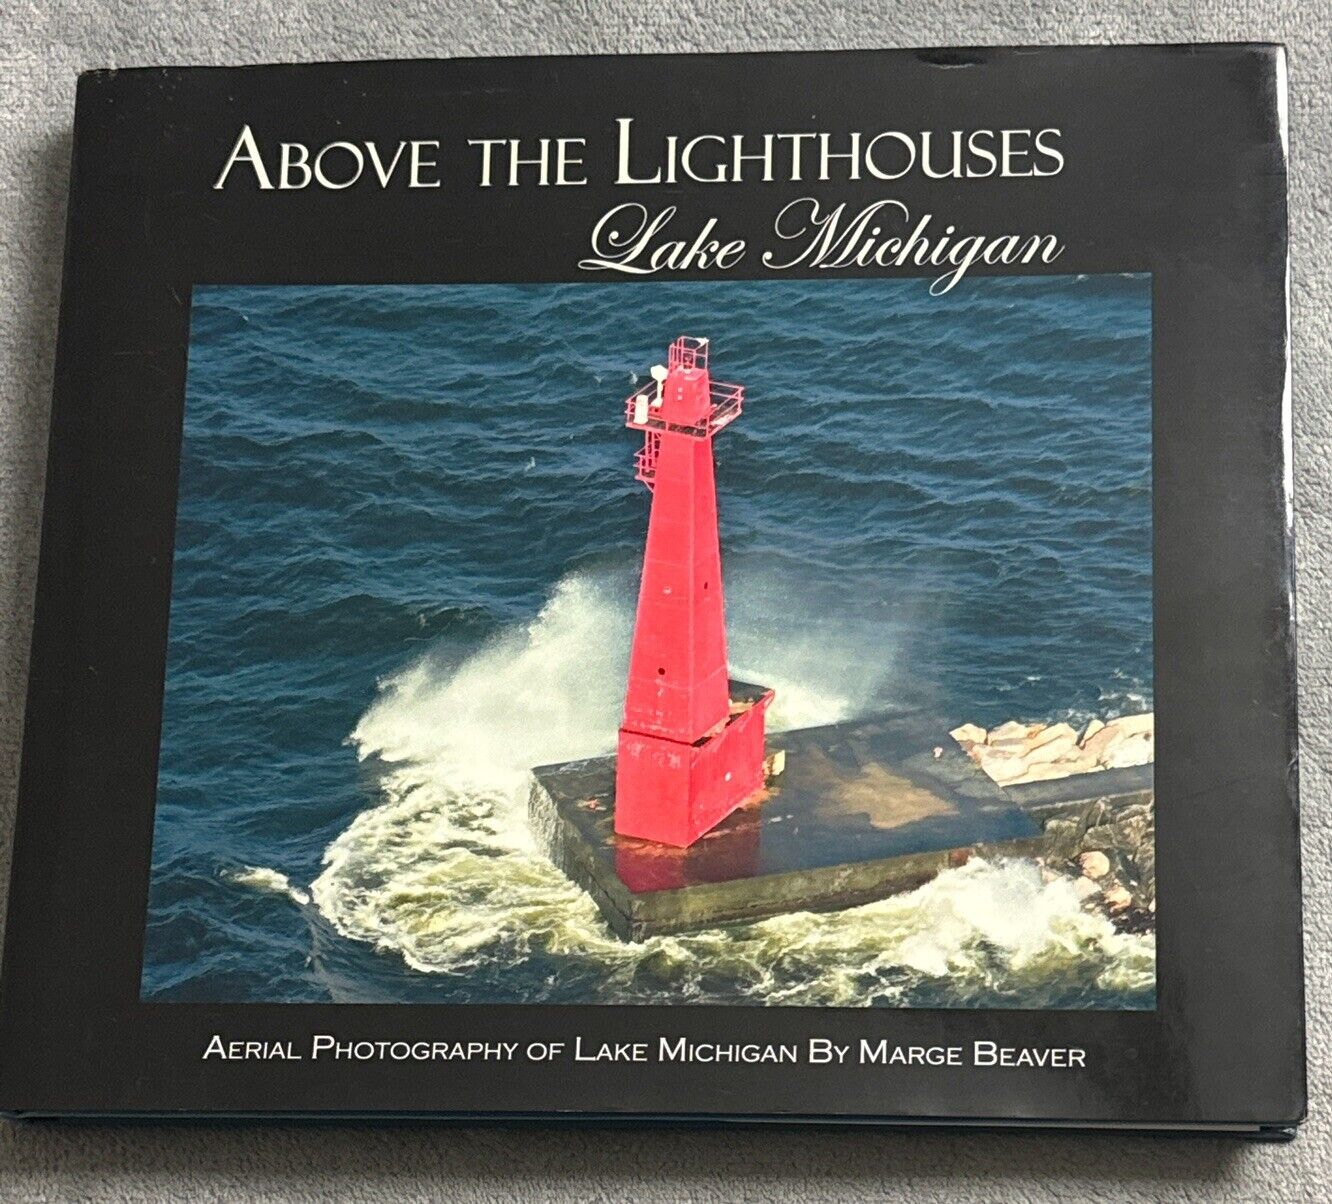 Above the Lighthouses - Lake Michigan Aerial Photography By Marge Beaver Signed